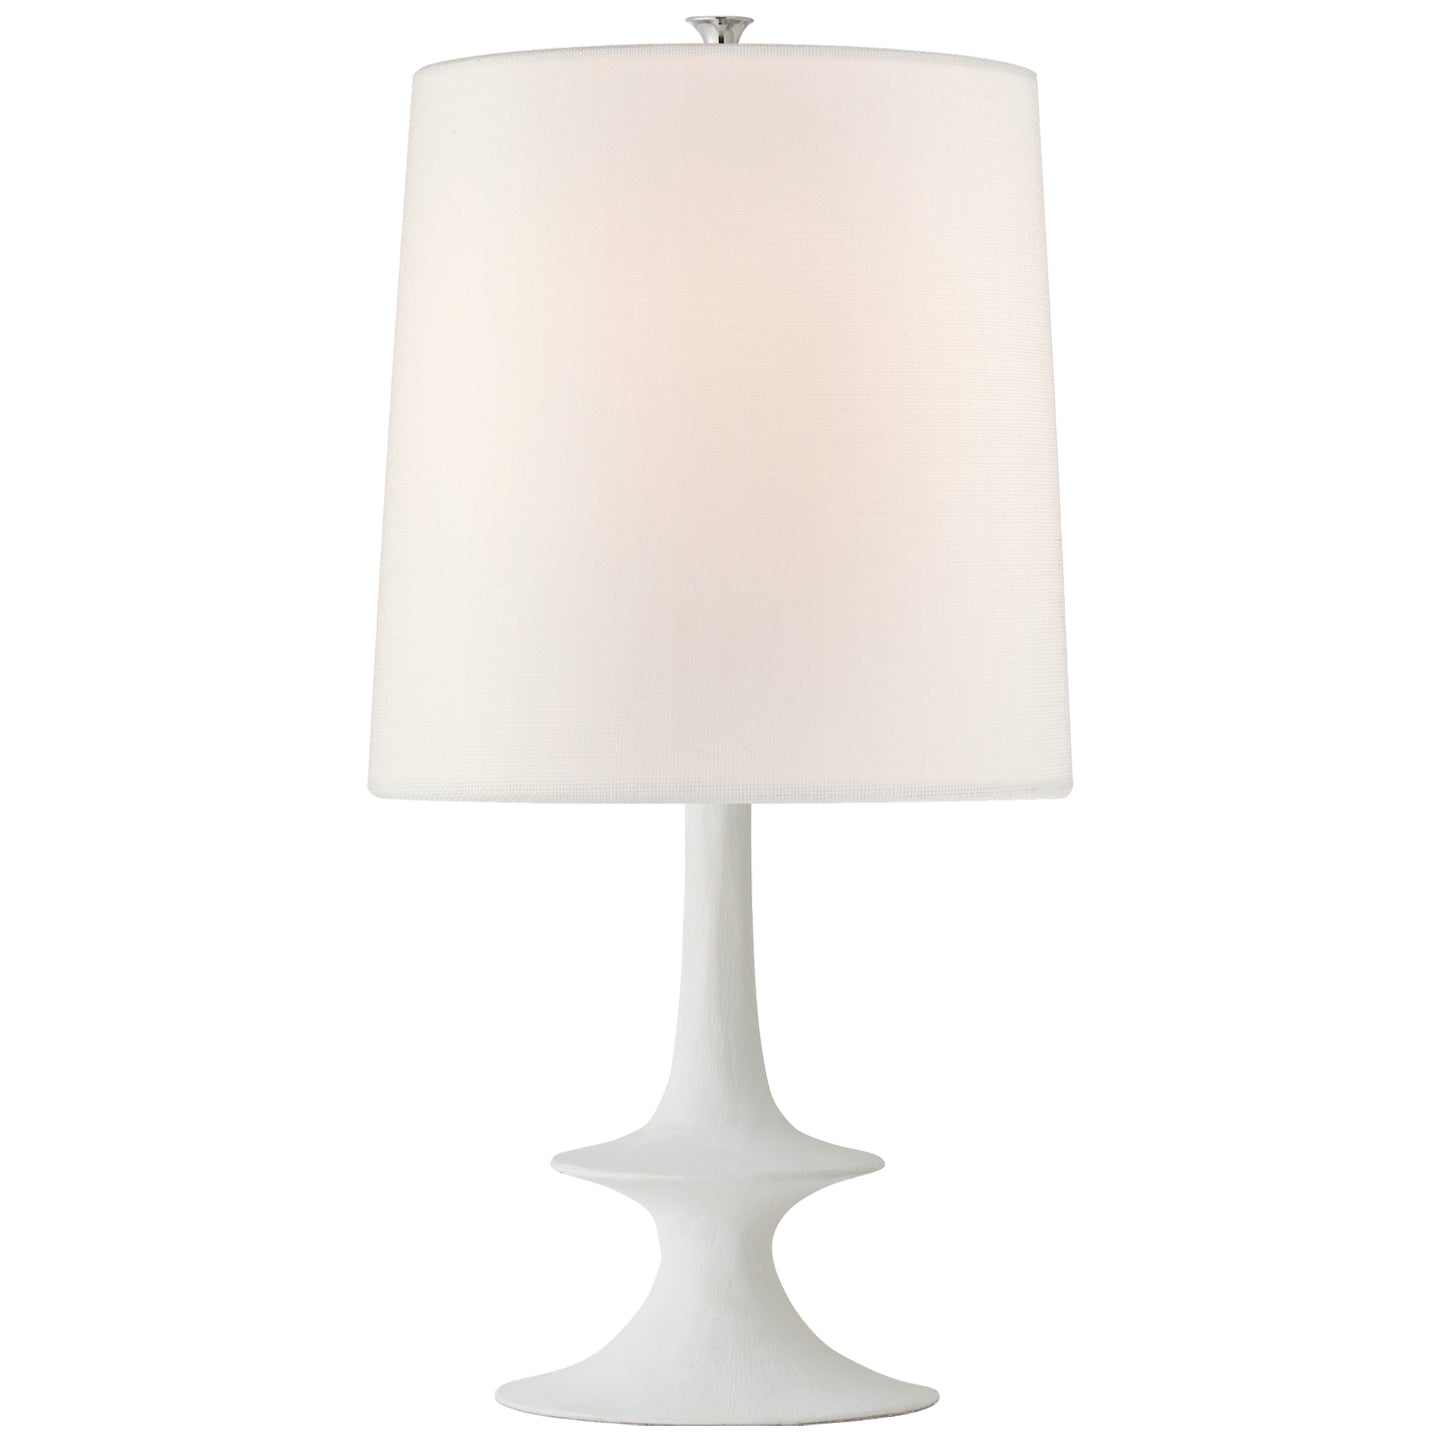 Load image into Gallery viewer, Visual Comfort Signature - ARN 3323PW-L - One Light Table Lamp - Lakmos - Plaster White
